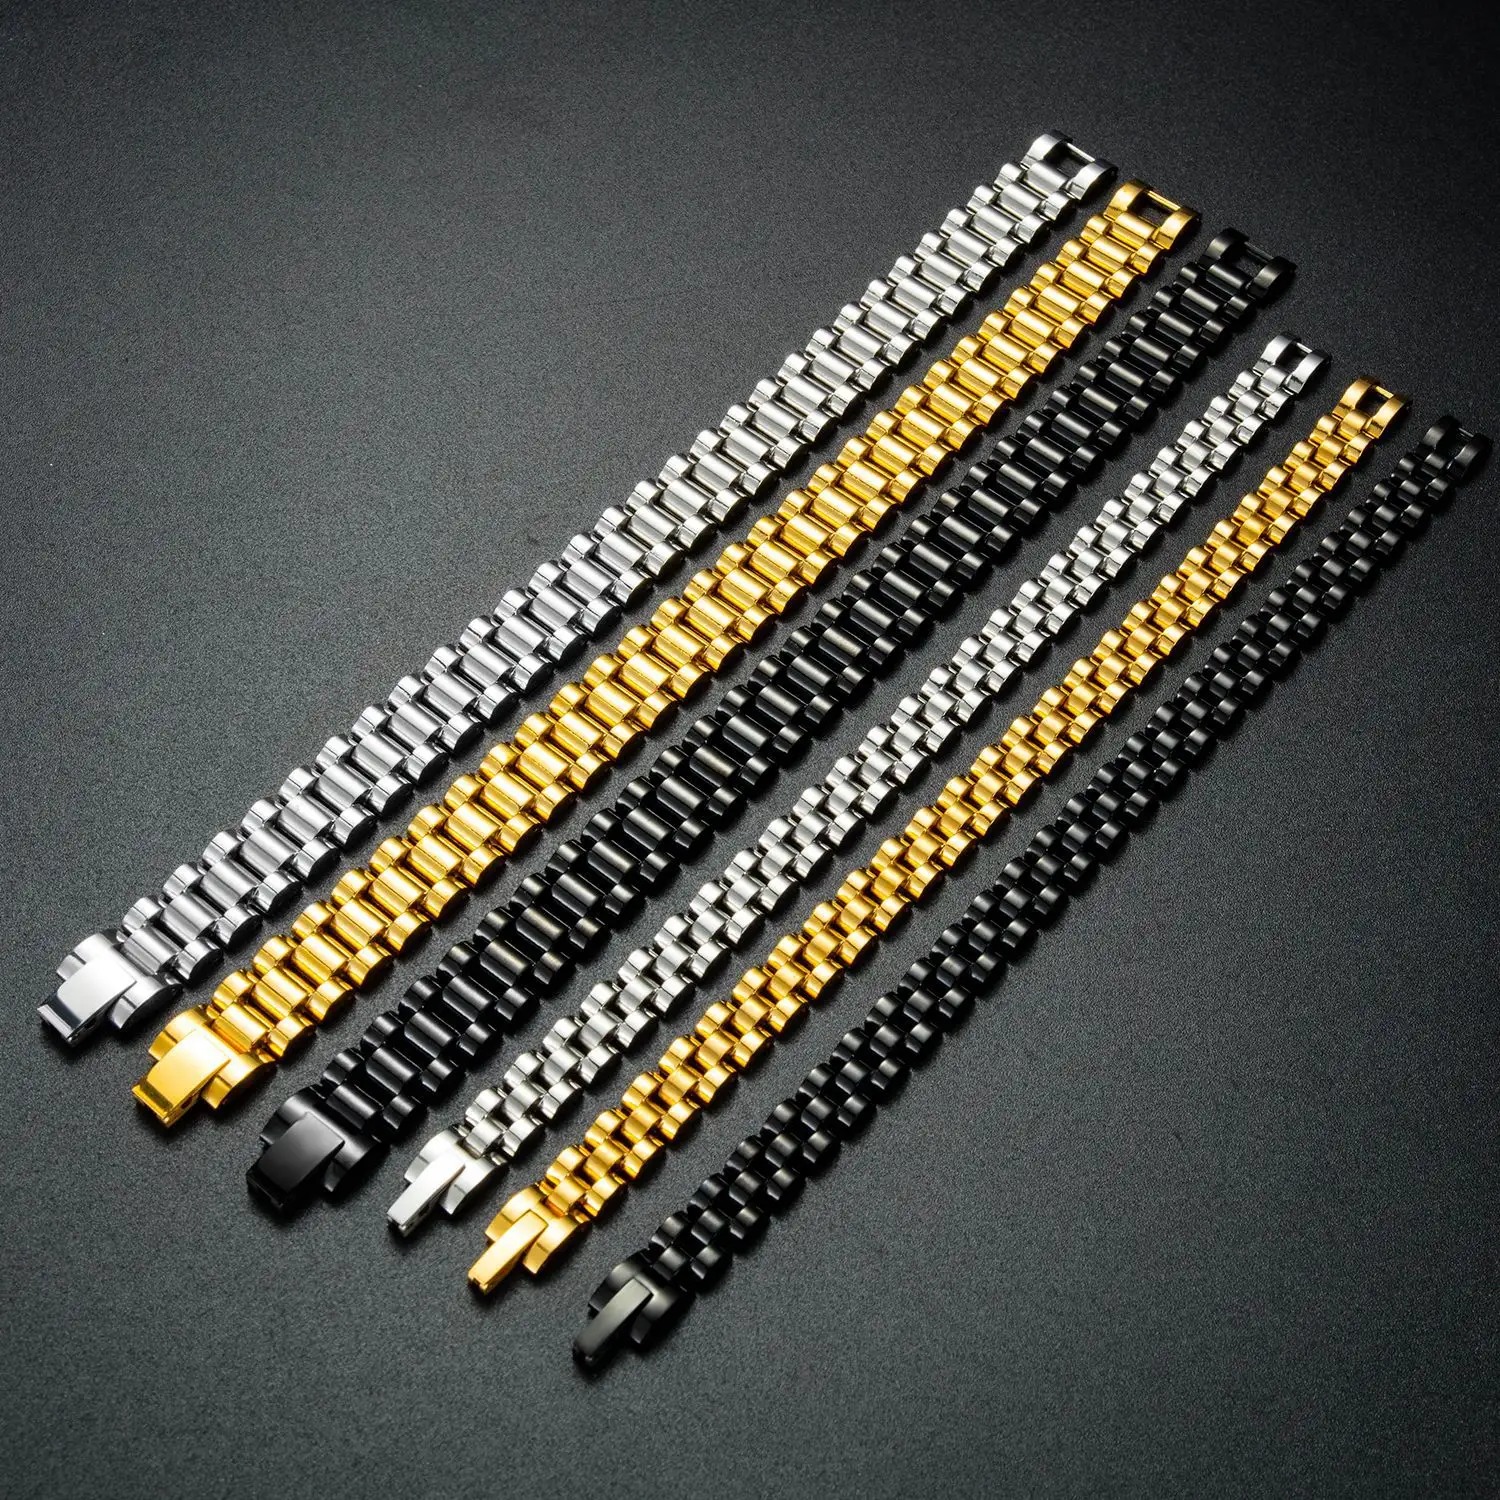 Hot Selling High Quality Stainless Steel Mens Jewelry Silver Black Gold Link Chain Bracelet Fashion Watch Band Bracelets for Men